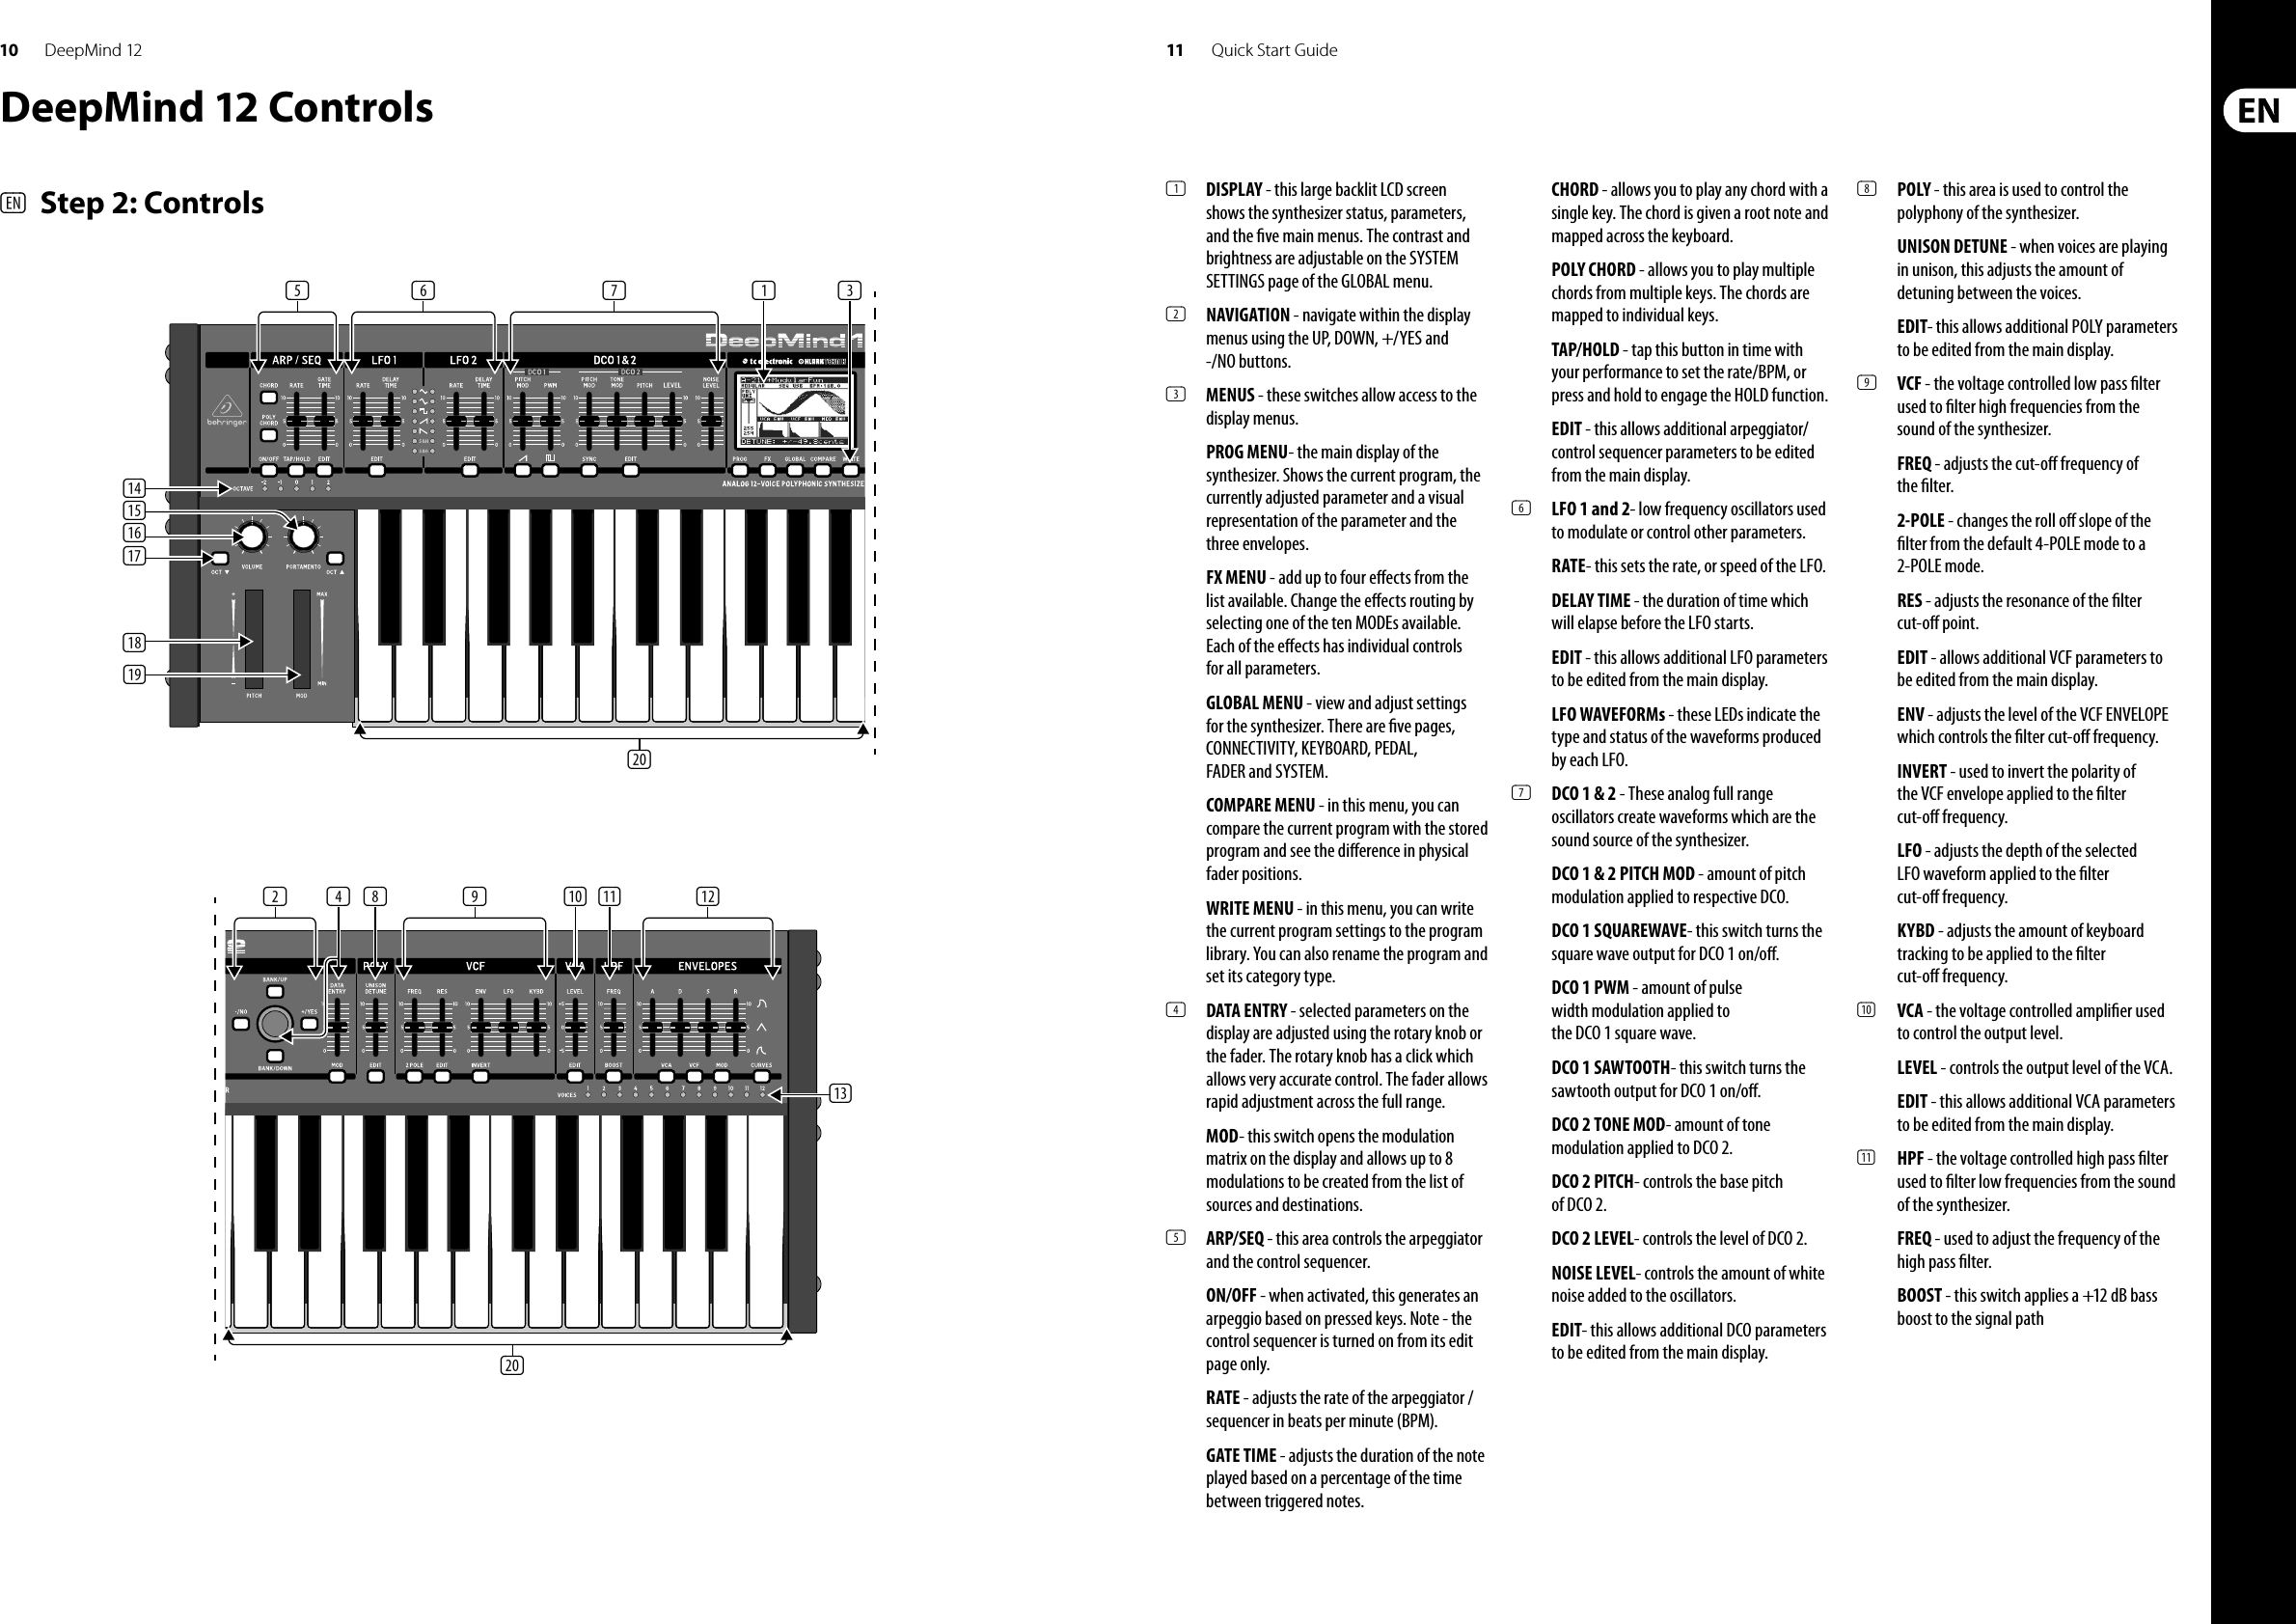 10 11DeepMind 12 Quick Start GuideDeepMind 12 Controls(EN)  Step 2: Controls(5) (6) (7) (1) (3)(20)(19)(18)(17)(16)(15)(14)(1)  DISPLAY - this large backlit LCD screen shows the synthesizer status, parameters, and the  ve main menus. The contrast and brightness are adjustable on the SYSTEM SETTINGS page of the GLOBAL menu.(2)  NAVIGATION - navigate within the display menus using the UP, DOWN, +/YES and -/NO buttons. (3)  MENUS - these switches allow access to the display menus.PROG MENU- the main display of the synthesizer. Shows the current program, the currently adjusted parameter and a visual representation of the parameter and the three envelopes.FX MENU - add up to four e ects from the list available. Change the e ects routing by selecting one of the ten MODEs available. Each of the e ects has individual controls for all parameters. GLOBAL MENU - view and adjust settings for the synthesizer. There are  ve pages, CONNECTIVITY, KEYBOARD, PEDAL, FADER and SYSTEM. COMPARE MENU - in this menu, you can compare the current program with the stored program and see the di erence in physical fader positions.WRITE MENU - in this menu, you can write the current program settings to the program library. You can also rename the program and set its category type. (4)  DATA ENTRY - selected parameters on the display are adjusted using the rotary knob or the fader. The rotary knob has a click which allows very accurate control. The fader allows rapid adjustment across the full range. MOD- this switch opens the modulation matrix on the display and allows up to 8 modulations to be created from the list of sources and destinations.(5)  ARP/SEQ - this area controls the arpeggiator and the control sequencer.ON/OFF - when activated, this generates an arpeggio based on pressed keys. Note - the control sequencer is turned on from its edit page only.RATE - adjusts the rate of the arpeggiator / sequencer in beats per minute (BPM). GATE TIME - adjusts the duration of the note played based on a percentage of the time between triggered notes.CHORD - allows you to play any chord with a single key. The chord is given a root note and mapped across the keyboard.POLY CHORD - allows you to play multiple chords from multiple keys. The chords are mapped to individual keys.TAP/HOLD - tap this button in time with your performance to set the rate/BPM, or press and hold to engage the HOLD function.EDIT - this allows additional arpeggiator/control sequencer parameters to be edited from the main display.(6)  LFO 1 and 2- low frequency oscillators used to modulate or control other parameters.RATE- this sets the rate, or speed of the LFO.DELAY TIME - the duration of time which will elapse before the LFO starts.EDIT - this allows additional LFO parameters to be edited from the main display.LFO WAVEFORMs - these LEDs indicate the type and status of the waveforms produced by each LFO.(7)  DCO 1 &amp; 2 - These analog full range oscillators create waveforms which are the sound source of the synthesizer.DCO 1 &amp; 2 PITCH MOD - amount of pitch modulation applied to respective DCO.DCO 1 SQUAREWAVE- this switch turns the square wave output for DCO 1 on/o .DCO 1 PWM - amount of pulse width modulation applied to the DCO 1 square wave.DCO 1 SAWTOOTH- this switch turns the sawtooth output for DCO 1 on/o .DCO 2 TONE MOD- amount of tone modulation applied to DCO 2.DCO 2 PITCH- controls the base pitch of DCO 2.DCO 2 LEVEL- controls the level of DCO 2.NOISE LEVEL- controls the amount of white noise added to the oscillators.EDIT- this allows additional DCO parameters to be edited from the main display.(8)  POLY - this area is used to control the polyphony of the synthesizer.UNISON DETUNE - when voices are playing in unison, this adjusts the amount of detuning between the voices.EDIT- this allows additional POLY parameters to be edited from the main display.(9)  VCF - the voltage controlled low pass  lter used to  lter high frequencies from the sound of the synthesizer.FREQ - adjusts the cut-o  frequency of the  lter.2-POLE - changes the roll o  slope of the  lter from the default 4-POLE mode to a 2-POLE mode.RES - adjusts the resonance of the  lter cut-o  point.EDIT - allows additional VCF parameters to be edited from the main display.ENV - adjusts the level of the VCF ENVELOPE which controls the  lter cut-o  frequency.INVERT - used to invert the polarity of the VCF envelope applied to the  lter cut-o  frequency.LFO - adjusts the depth of the selected LFO waveform applied to the  lter cut-o  frequency.KYBD - adjusts the amount of keyboard tracking to be applied to the  lter cut-o  frequency.(10)  VCA - the voltage controlled ampli er used to control the output level.LEVEL - controls the output level of the VCA.EDIT - this allows additional VCA parameters to be edited from the main display.(11)  HPF - the voltage controlled high pass  lter used to  lter low frequencies from the sound of the synthesizer. FREQ - used to adjust the frequency of the high pass  lter.BOOST - this switch applies a +12 dB bass boost to the signal path(2) (4) (8) (9) (10) (11) (12)(13)(20)